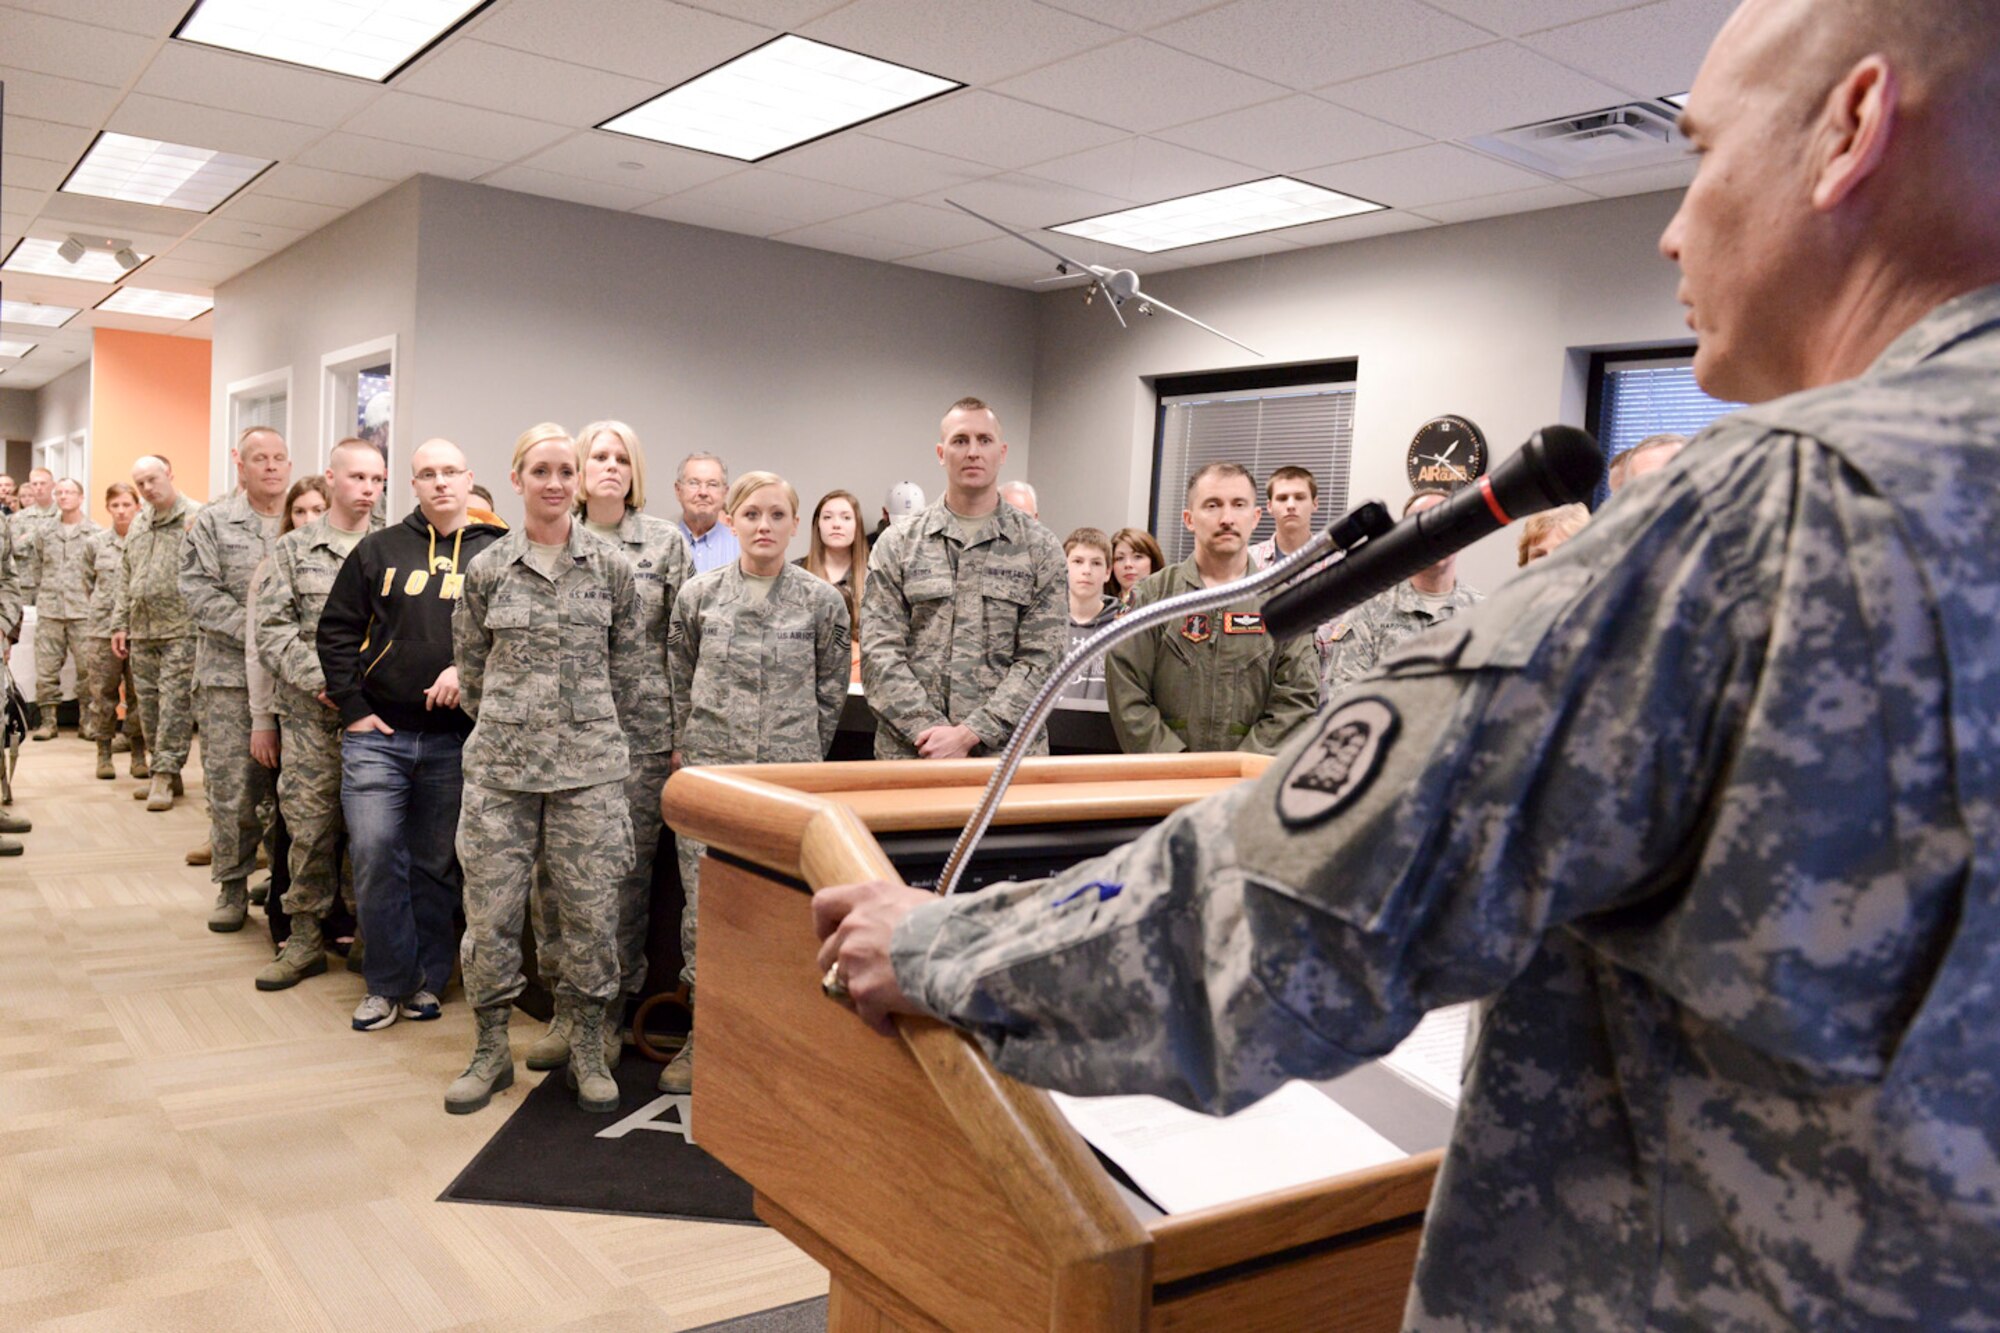 The Adjutant General of the Iowa National Guard, Maj. Gen. Timothy Orr (podium), speaks to members of the Iowa Air and Army National Guard as they celebrate the opening of the 132d Wing, Des Moines, Iowa off-site Recruiting Operation Center during a ribbon cutting ceremony held at the new Recruiting Operation Center in West Des Moines, Iowa on Tuesday, March 24, 2015.  (U.S. Air National Guard photo by Staff Sgt. Linda K. Burger/Released)